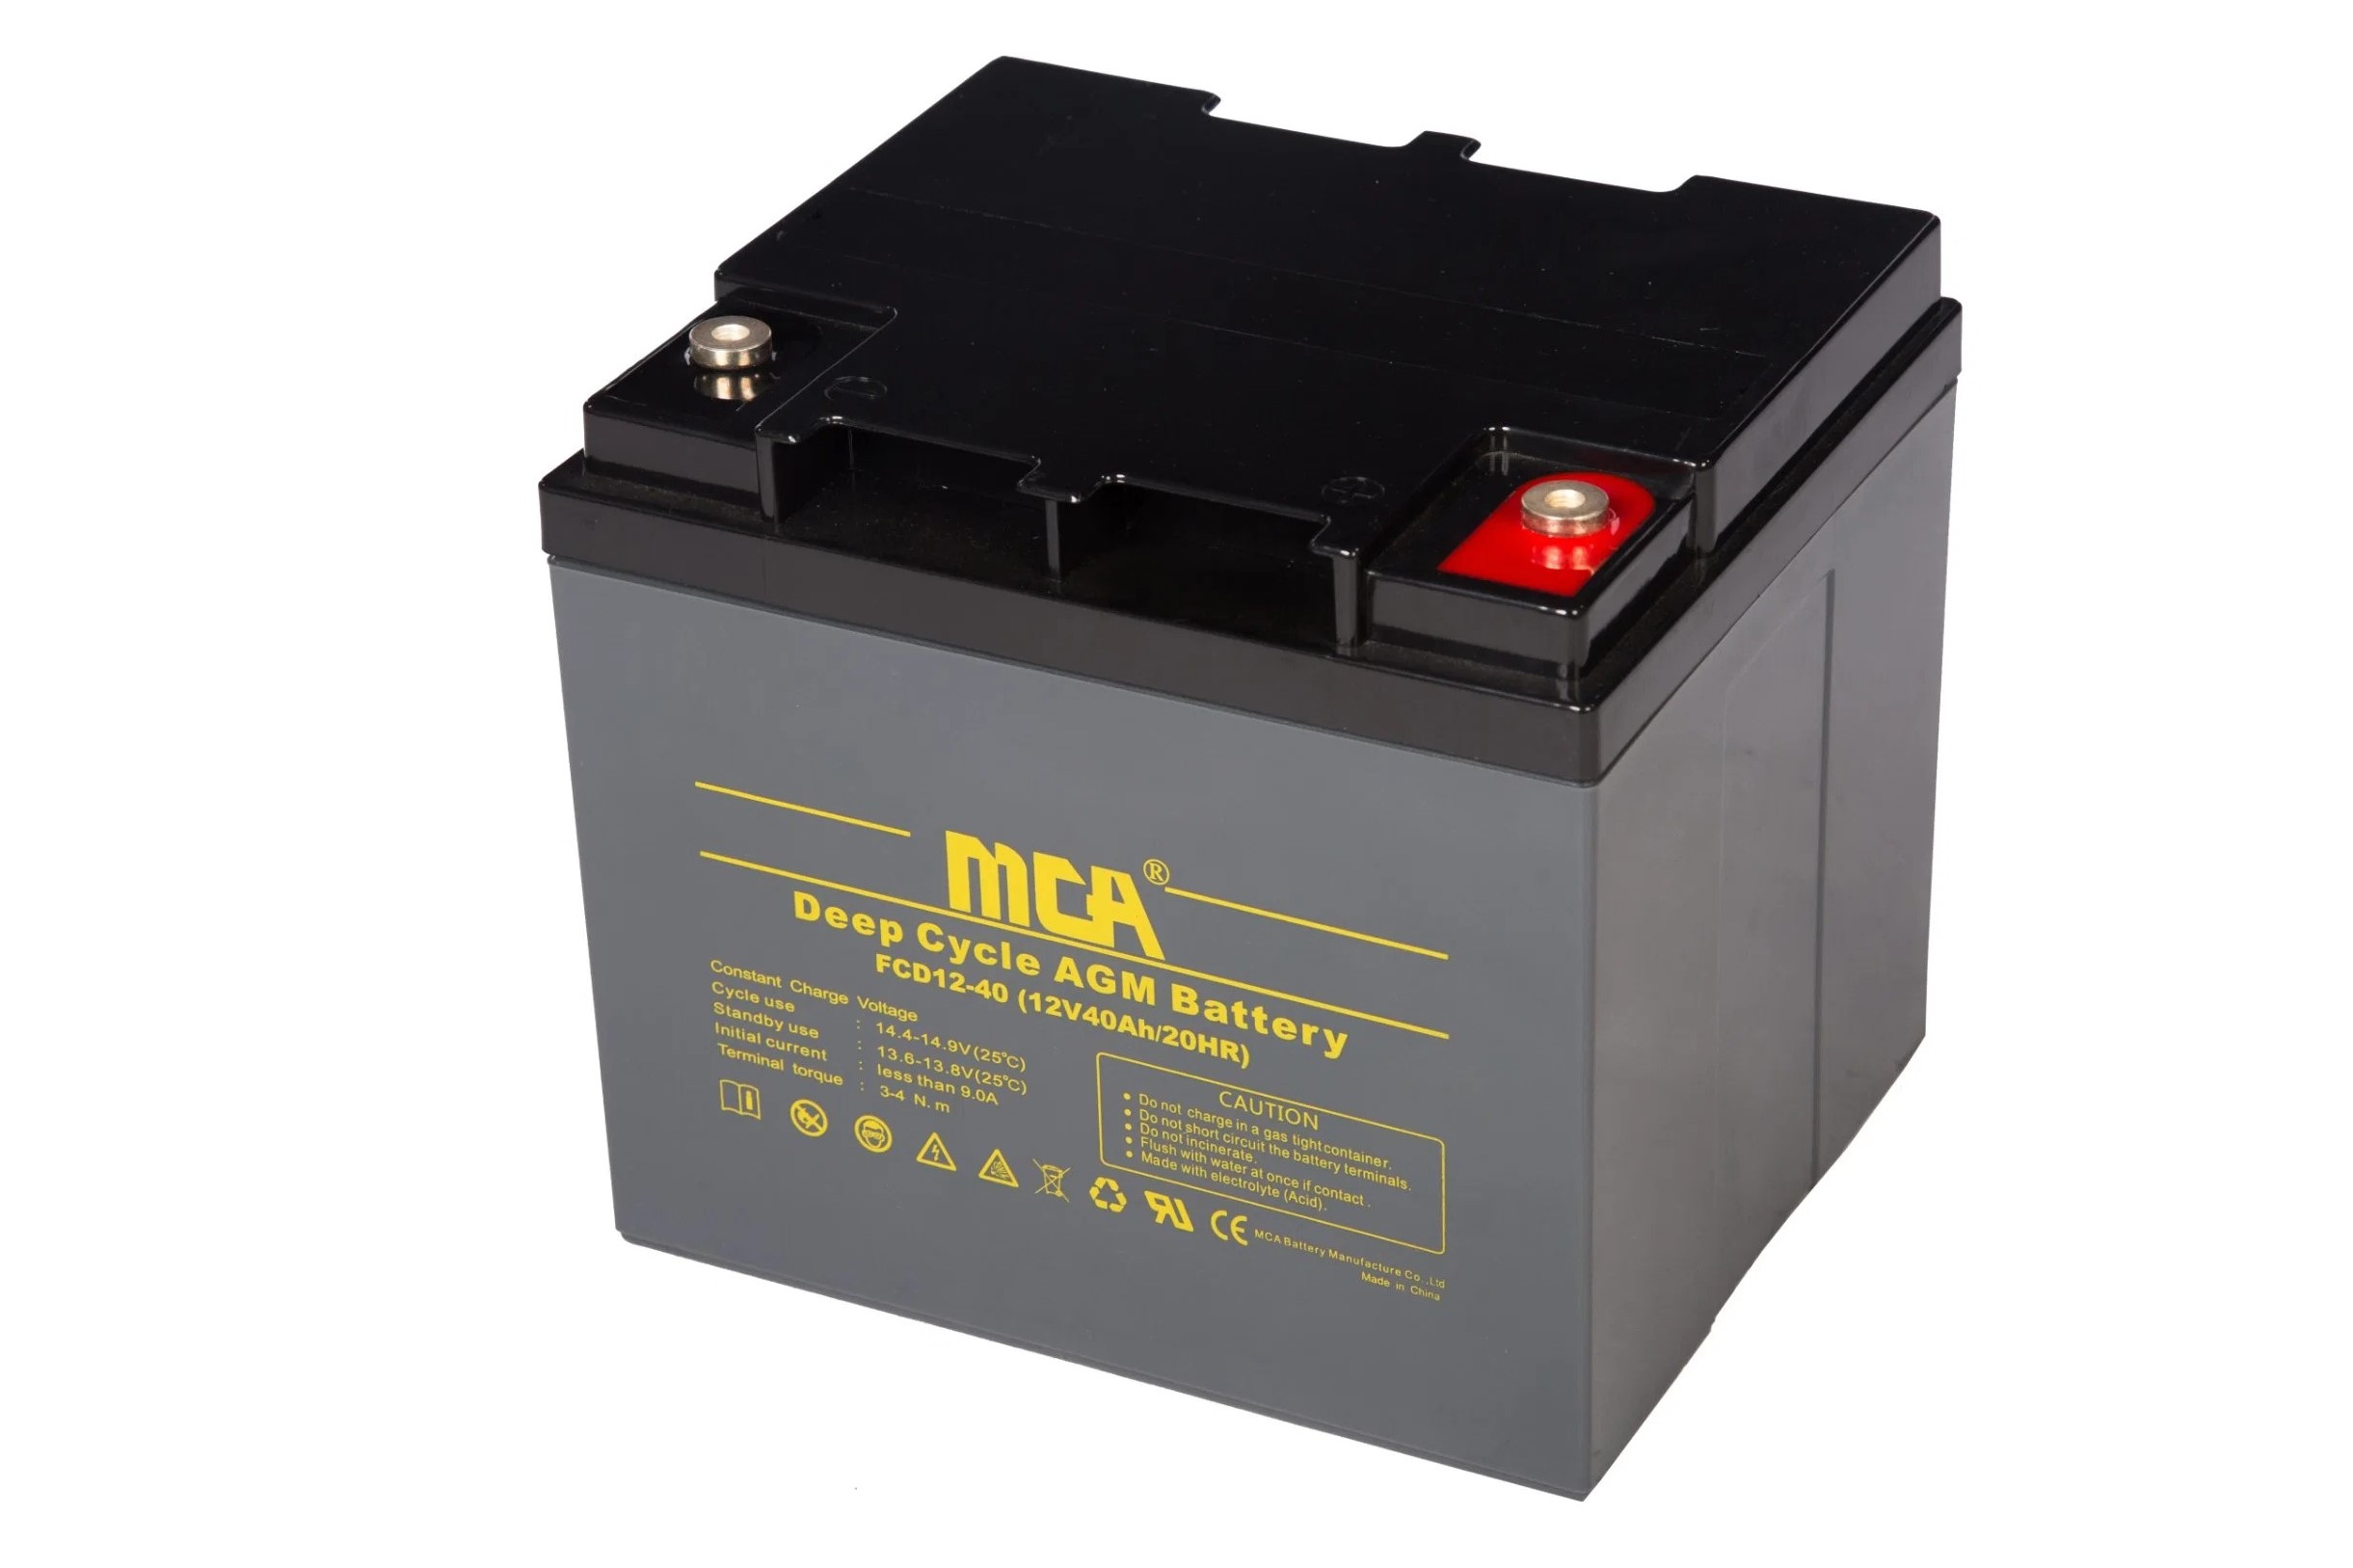 Understanding The Meaning Of MCA On Batteries